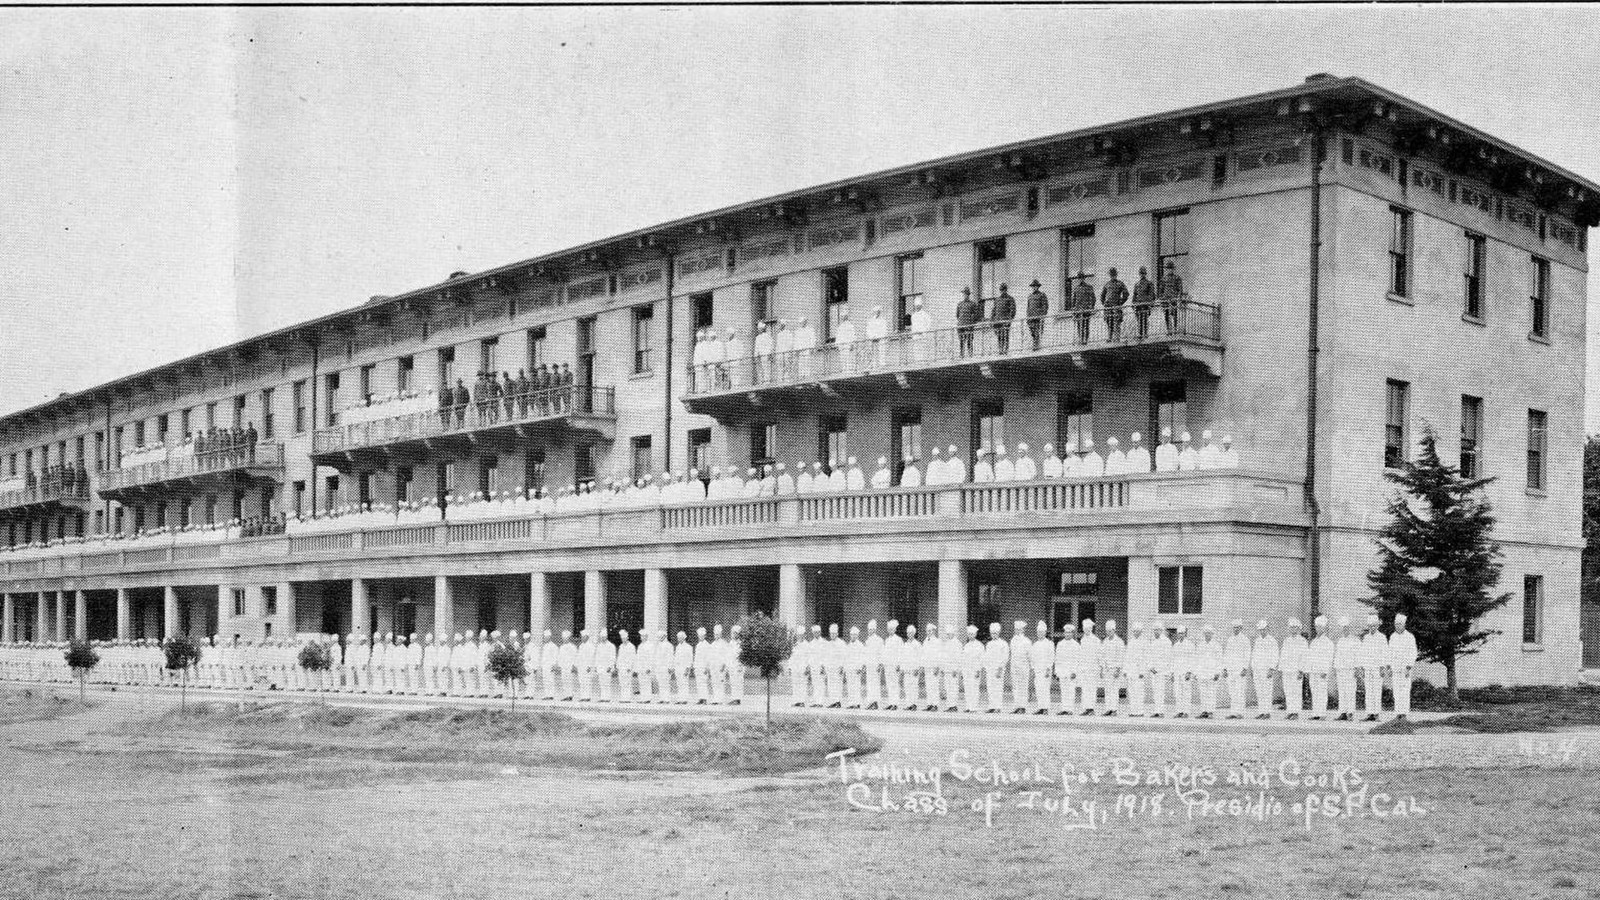 Men in white stand in front of and on the balconies of a three story building.